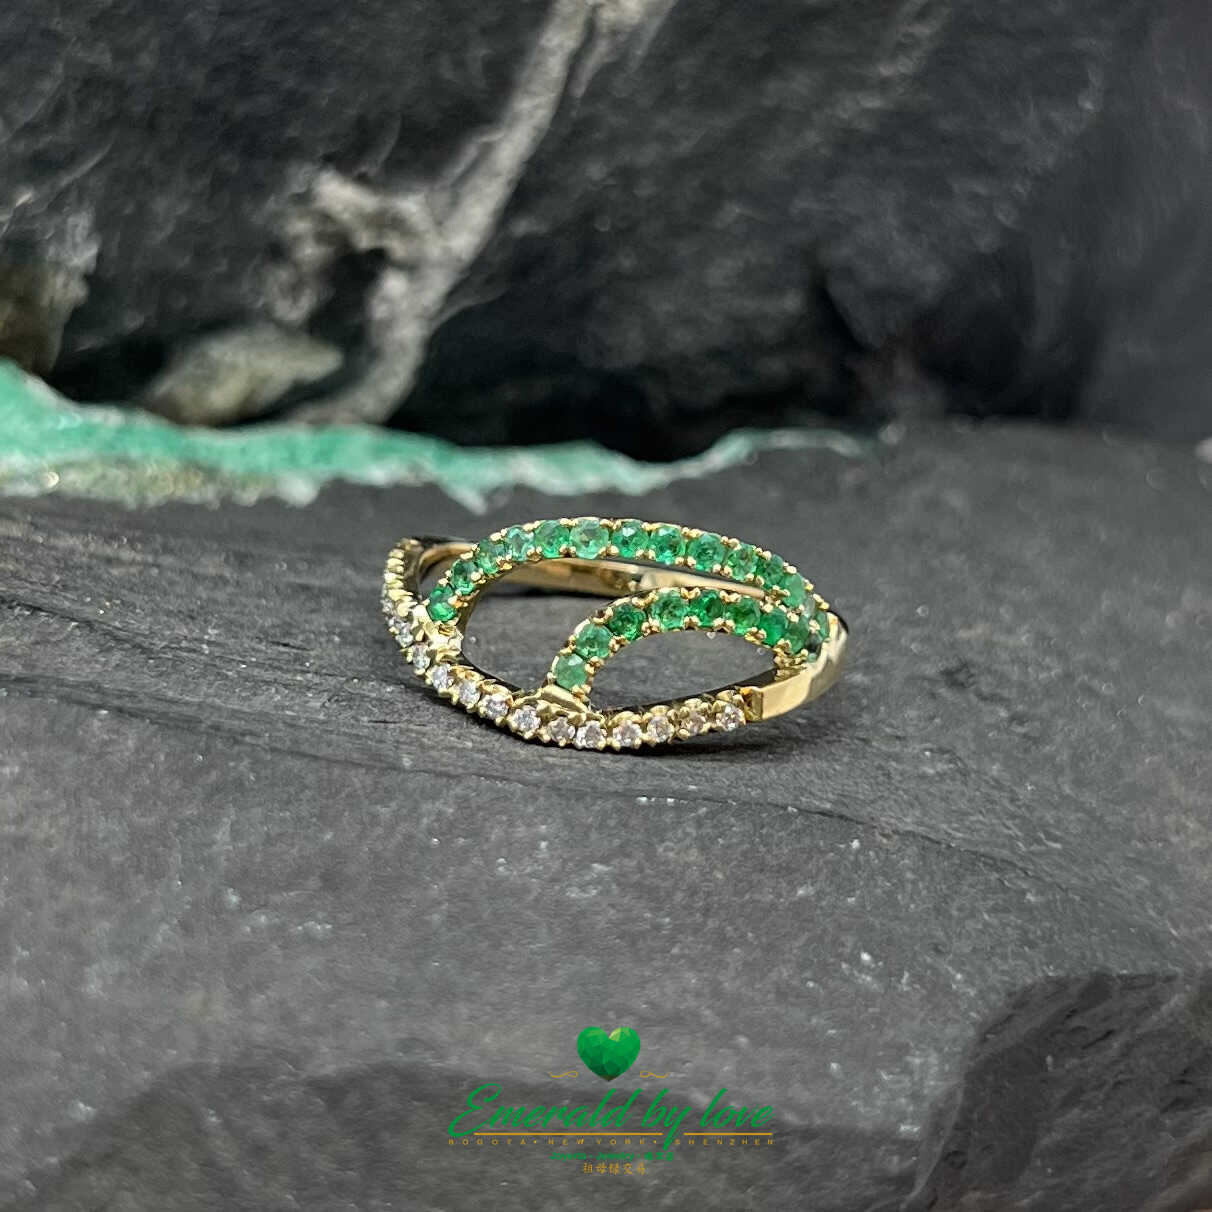 Unique Yellow Gold Ring with Amorphous Design